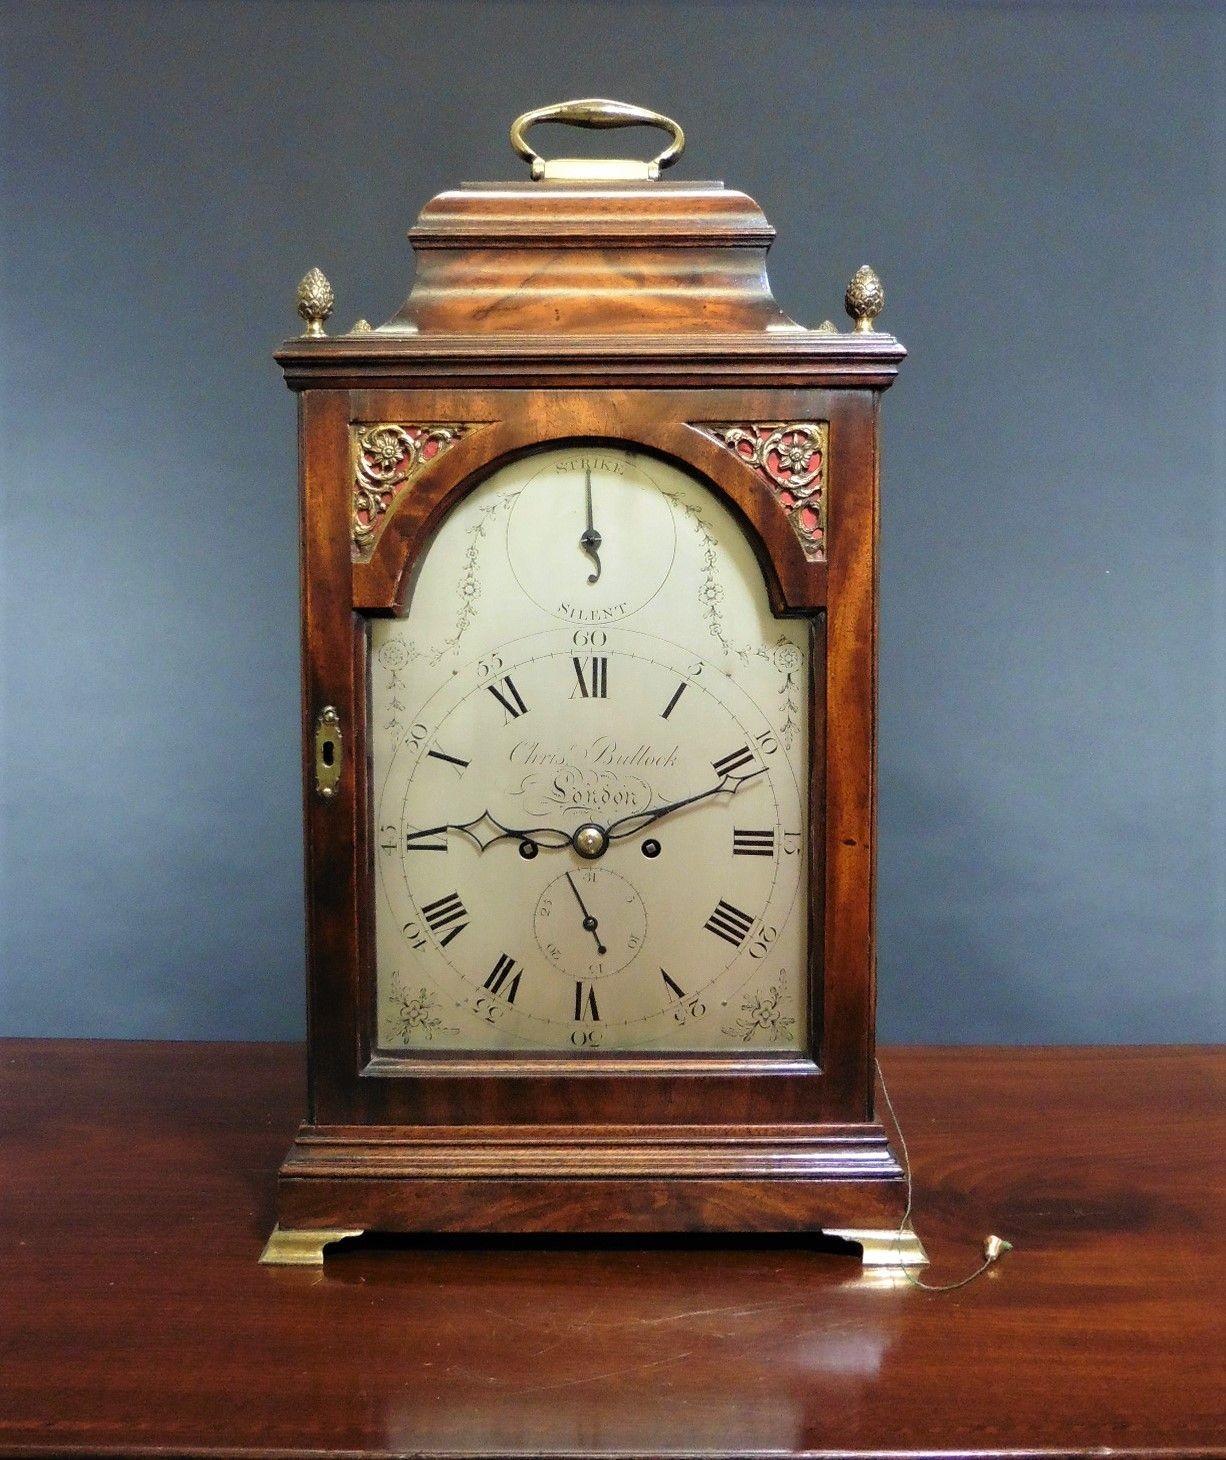 George III bracket clock by Christopher Bullock, London

Finely figured mahogany bell top case with four ‘pineapple’ finials surmounted by a hinged carrying handle standing on a stepped, raised plinth and resting on four outswept brass bracket feet.